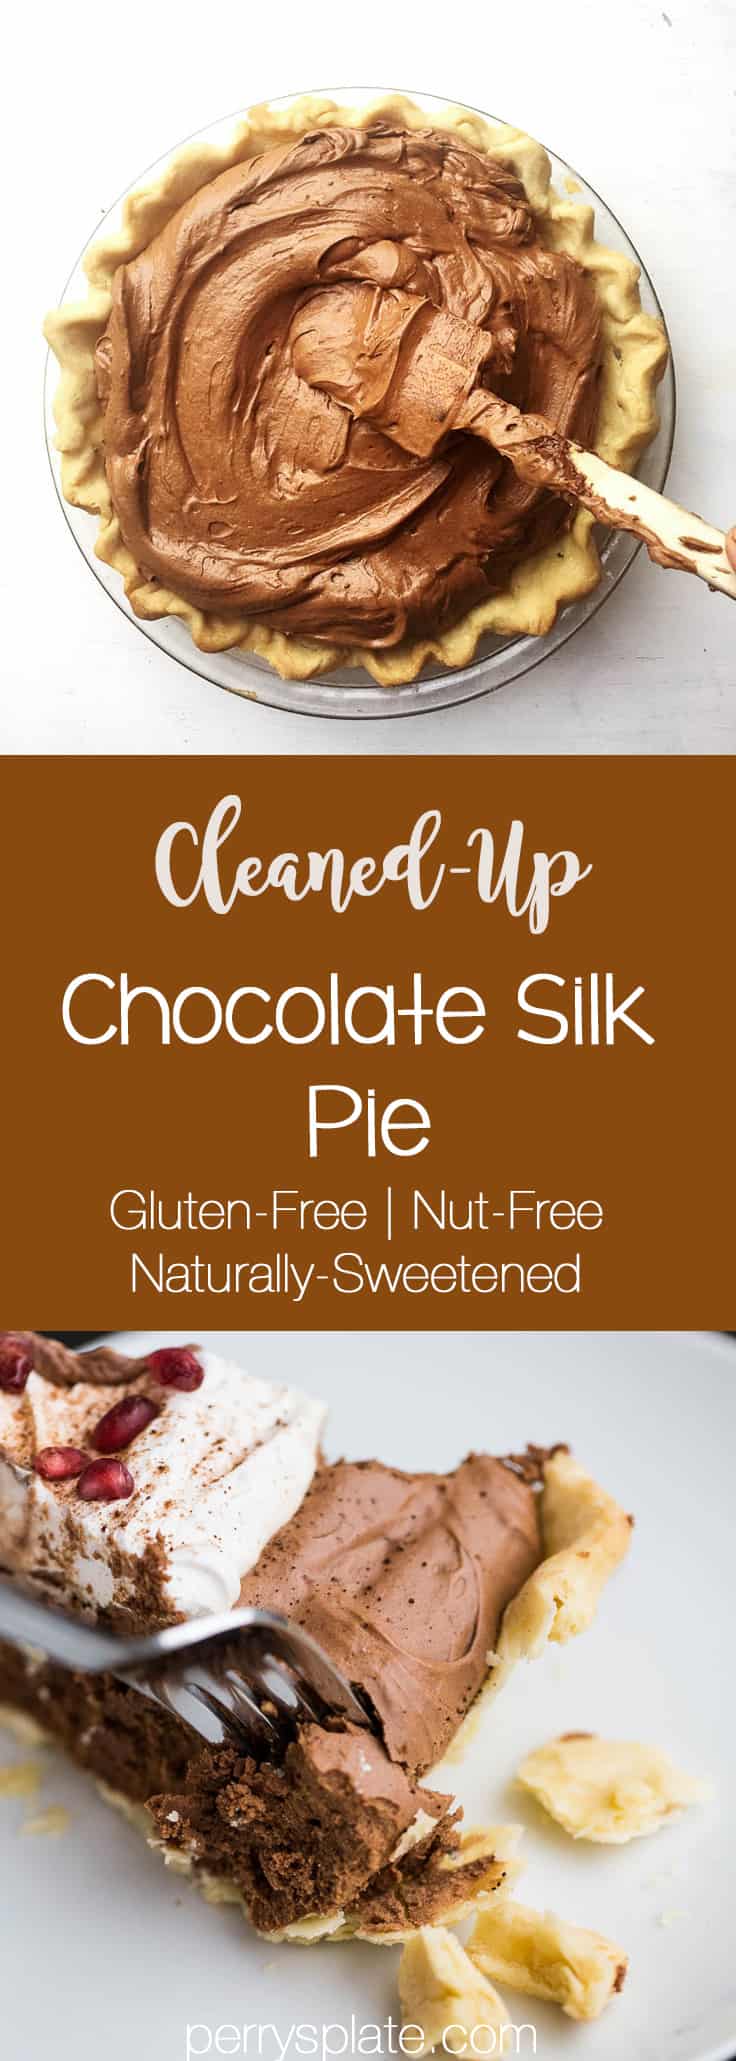 Cleaned-Up Chocolate Silk Pie -- gluten-free, naturally-sweetened and the only dairy is grass-fed butter! | perrysplate.com 